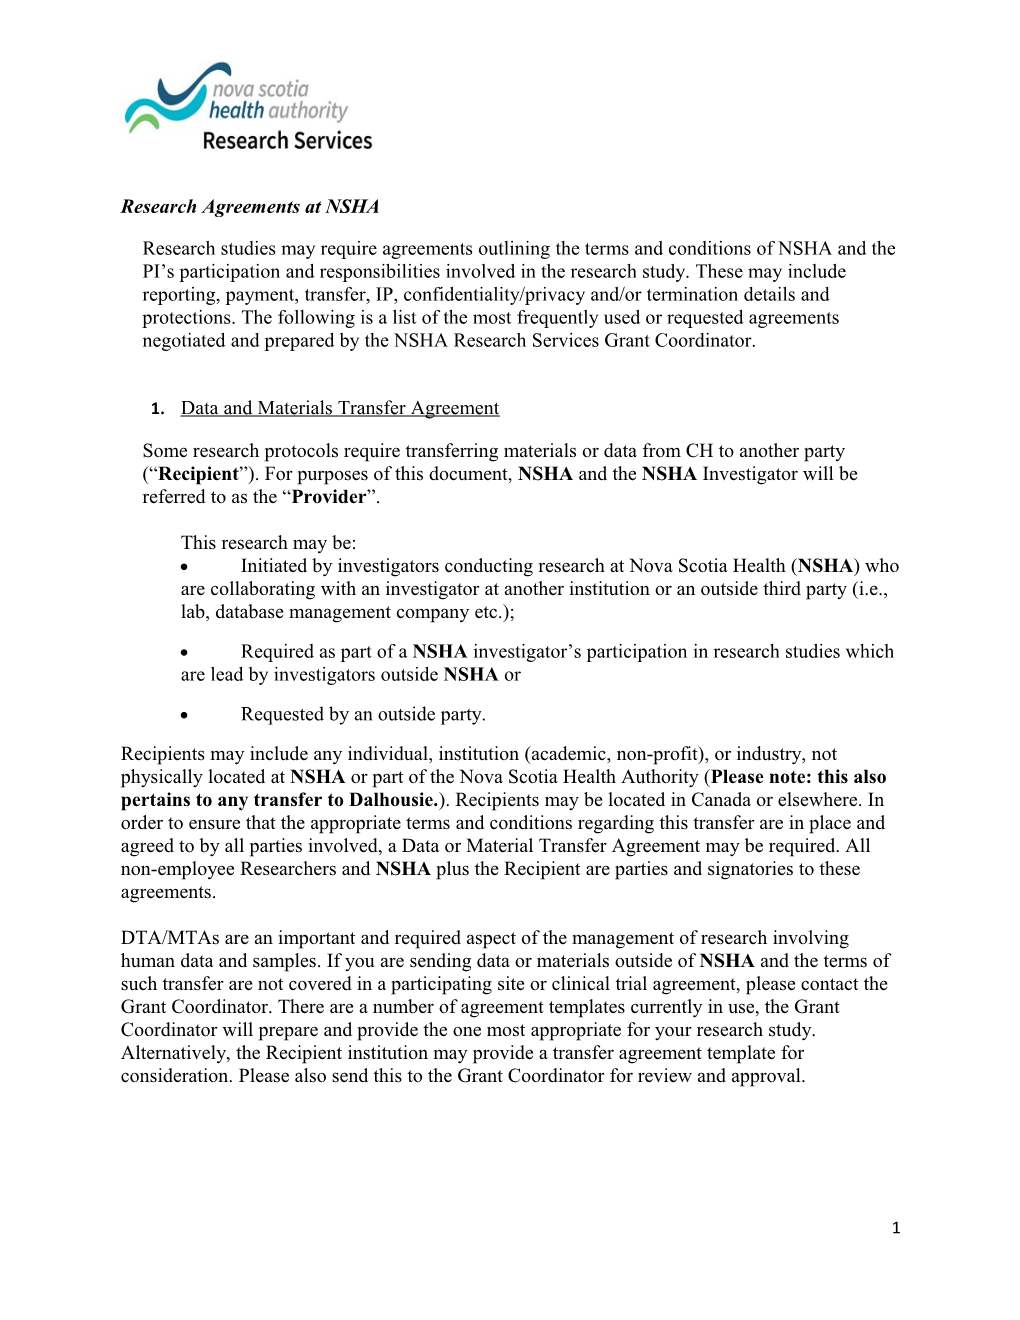 Research Agreements at NSHA